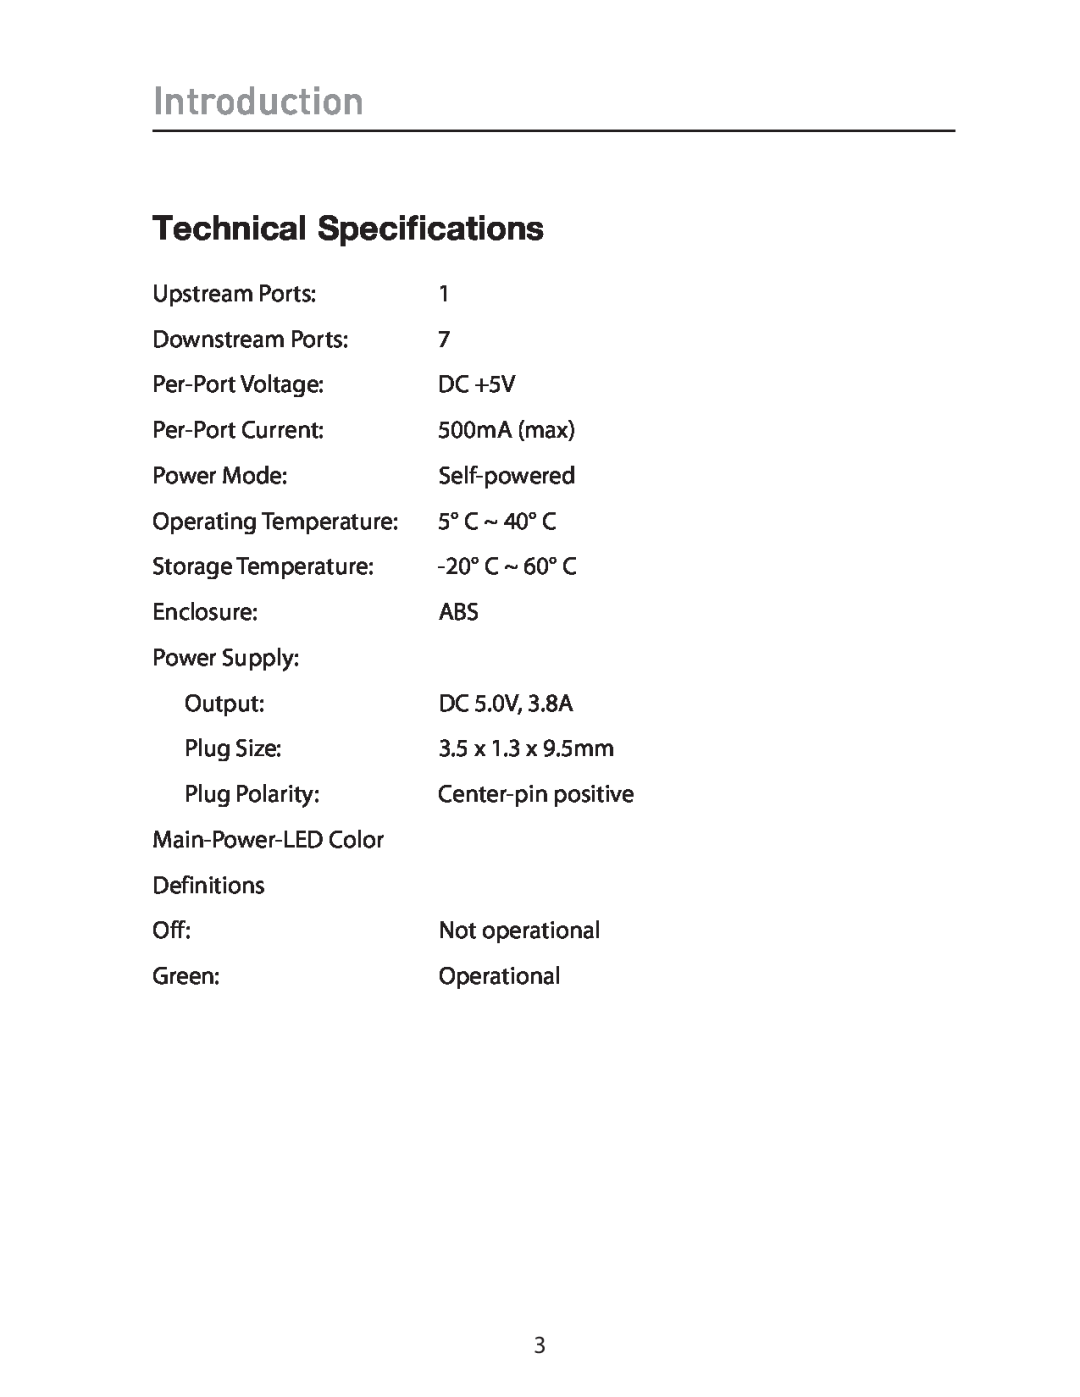 Belkin P75470ea manual Technical Speciﬁcations, Introduction 